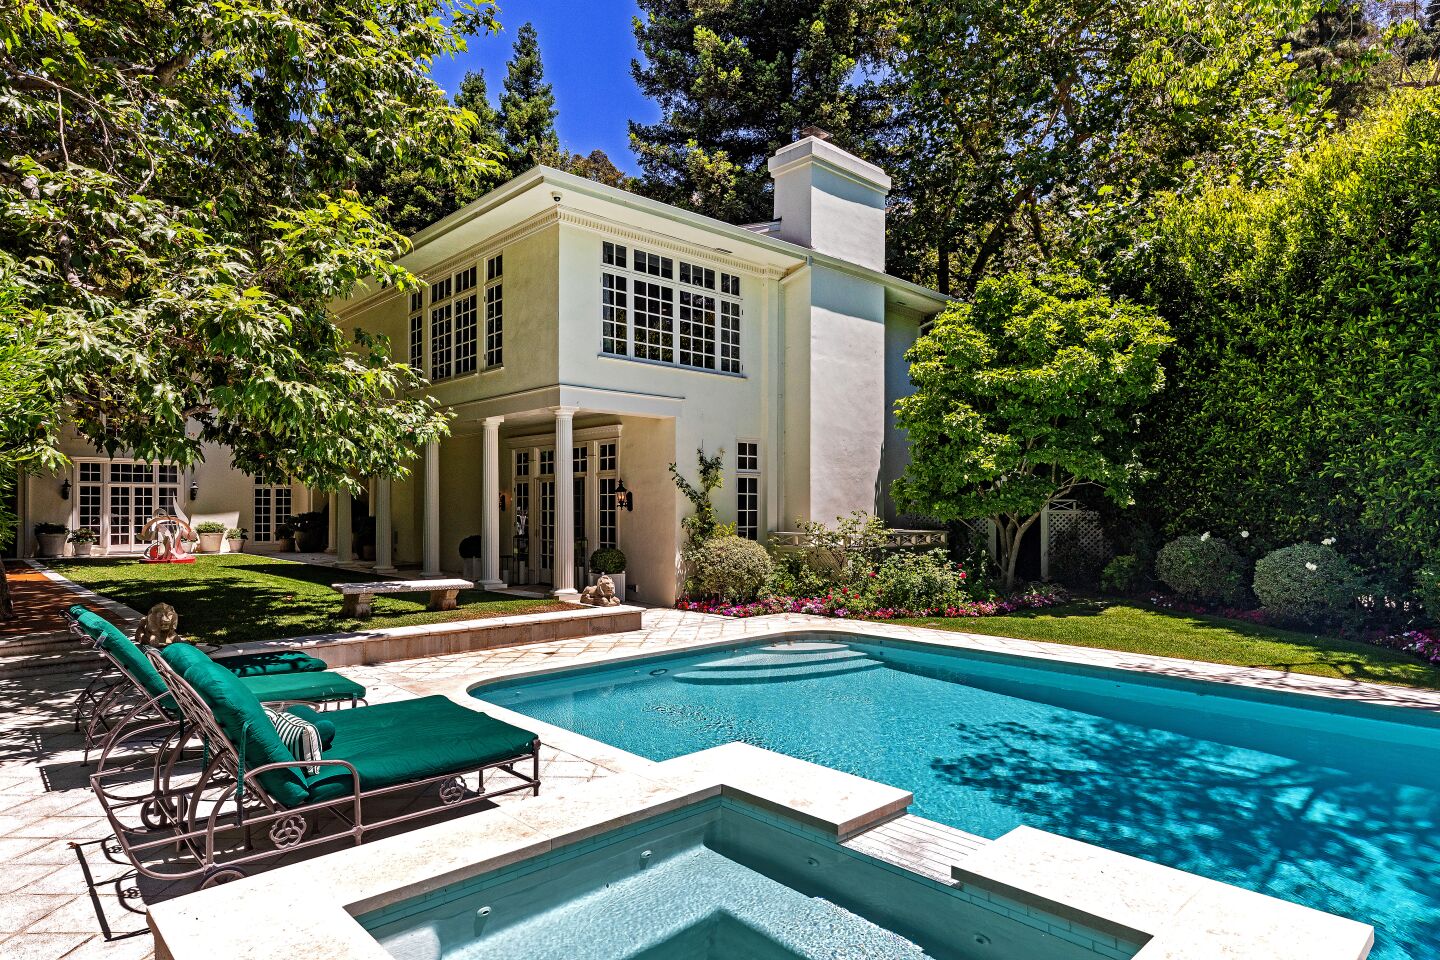 A rectangular pool and hot tub with deck chairs outside a white traditional-style home in Bel-Air